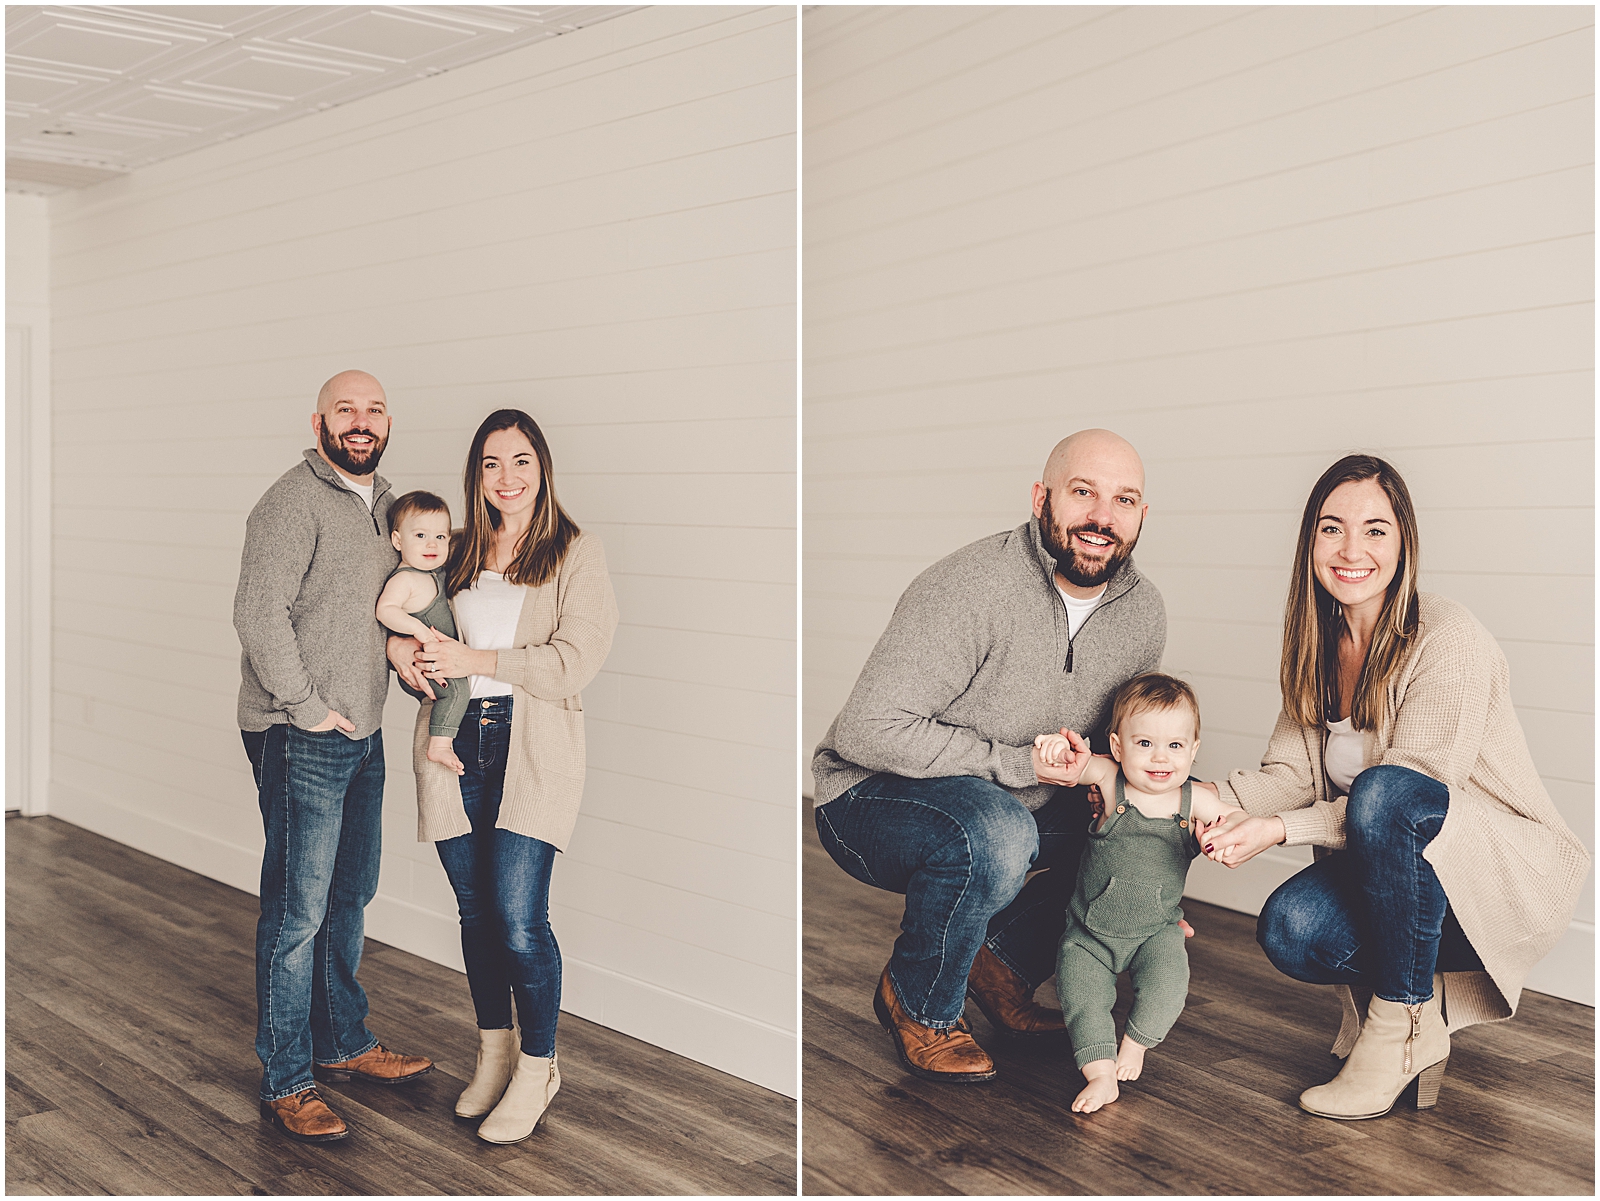 Family photography session with the DePaolo family at Kara Evans Photographer - Natural Light Studio Photographer in Kankakee, Illinois.